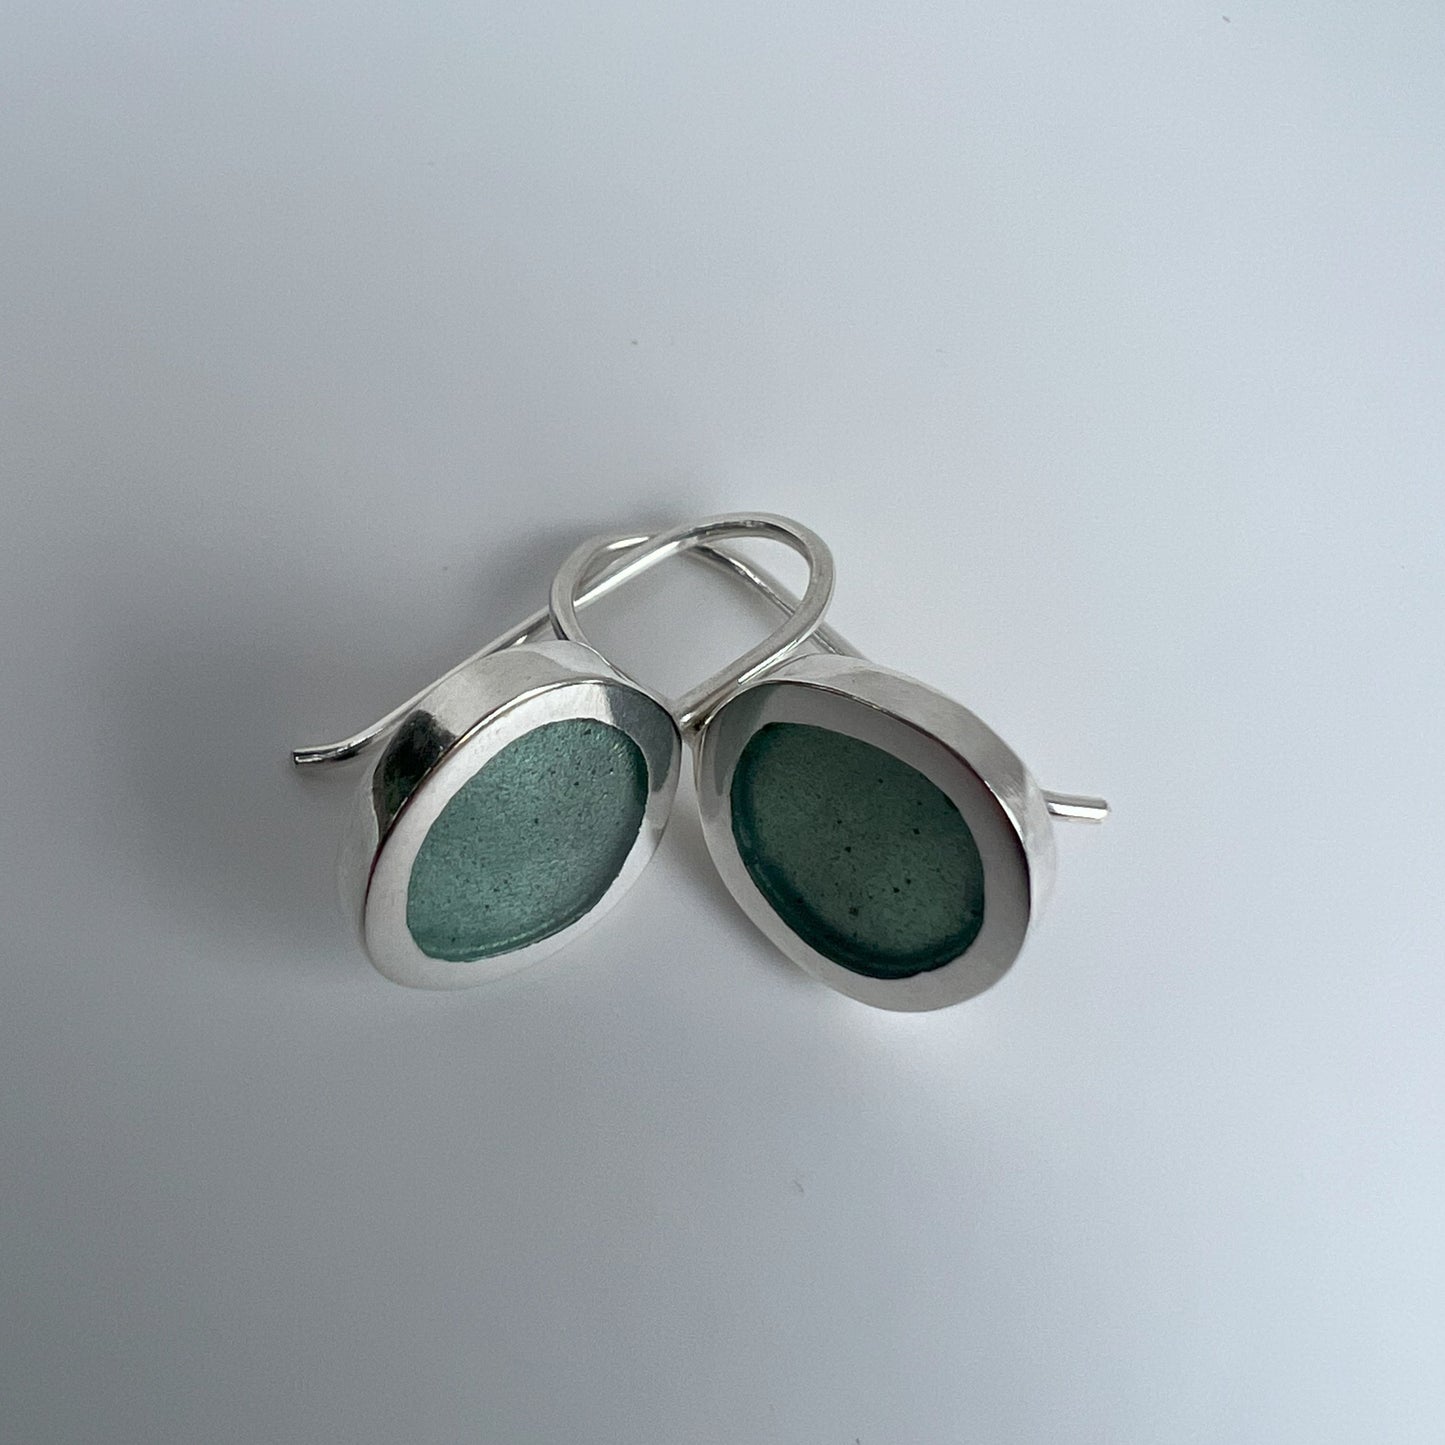 Translucent Pale Green Resin and Silver Drop Earrings (Small)